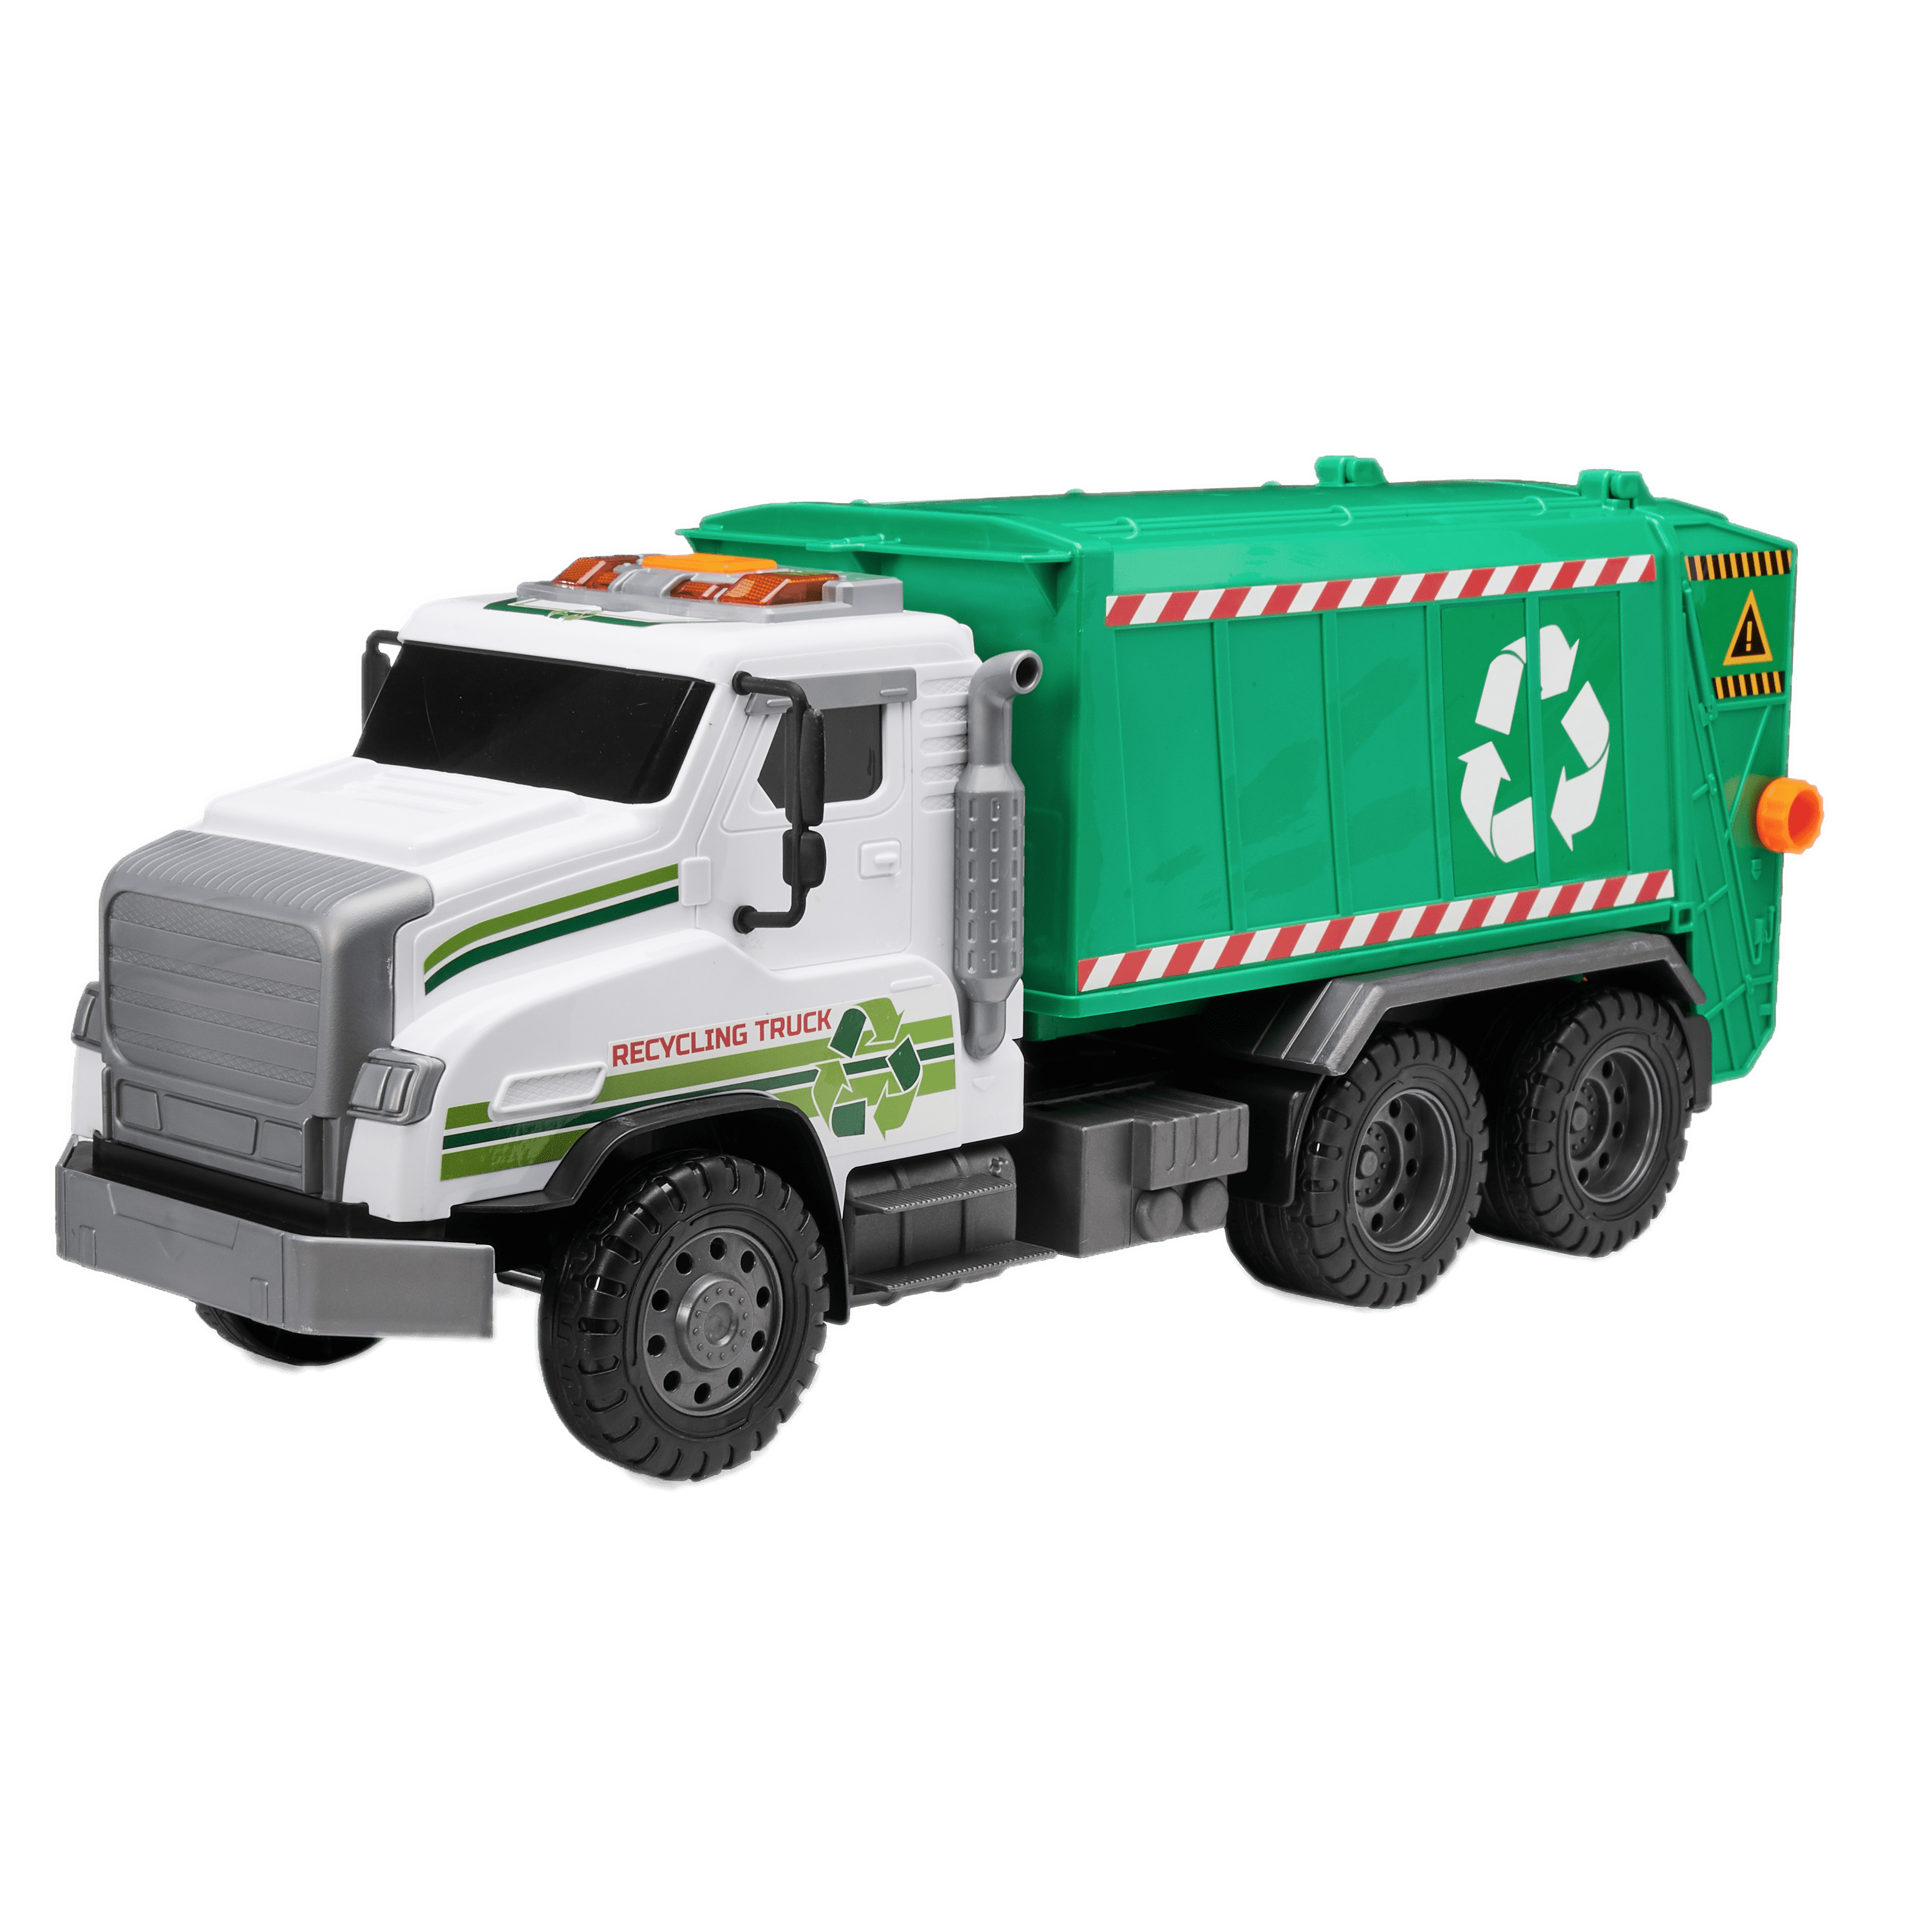 Toy Recycling Truck SVG file